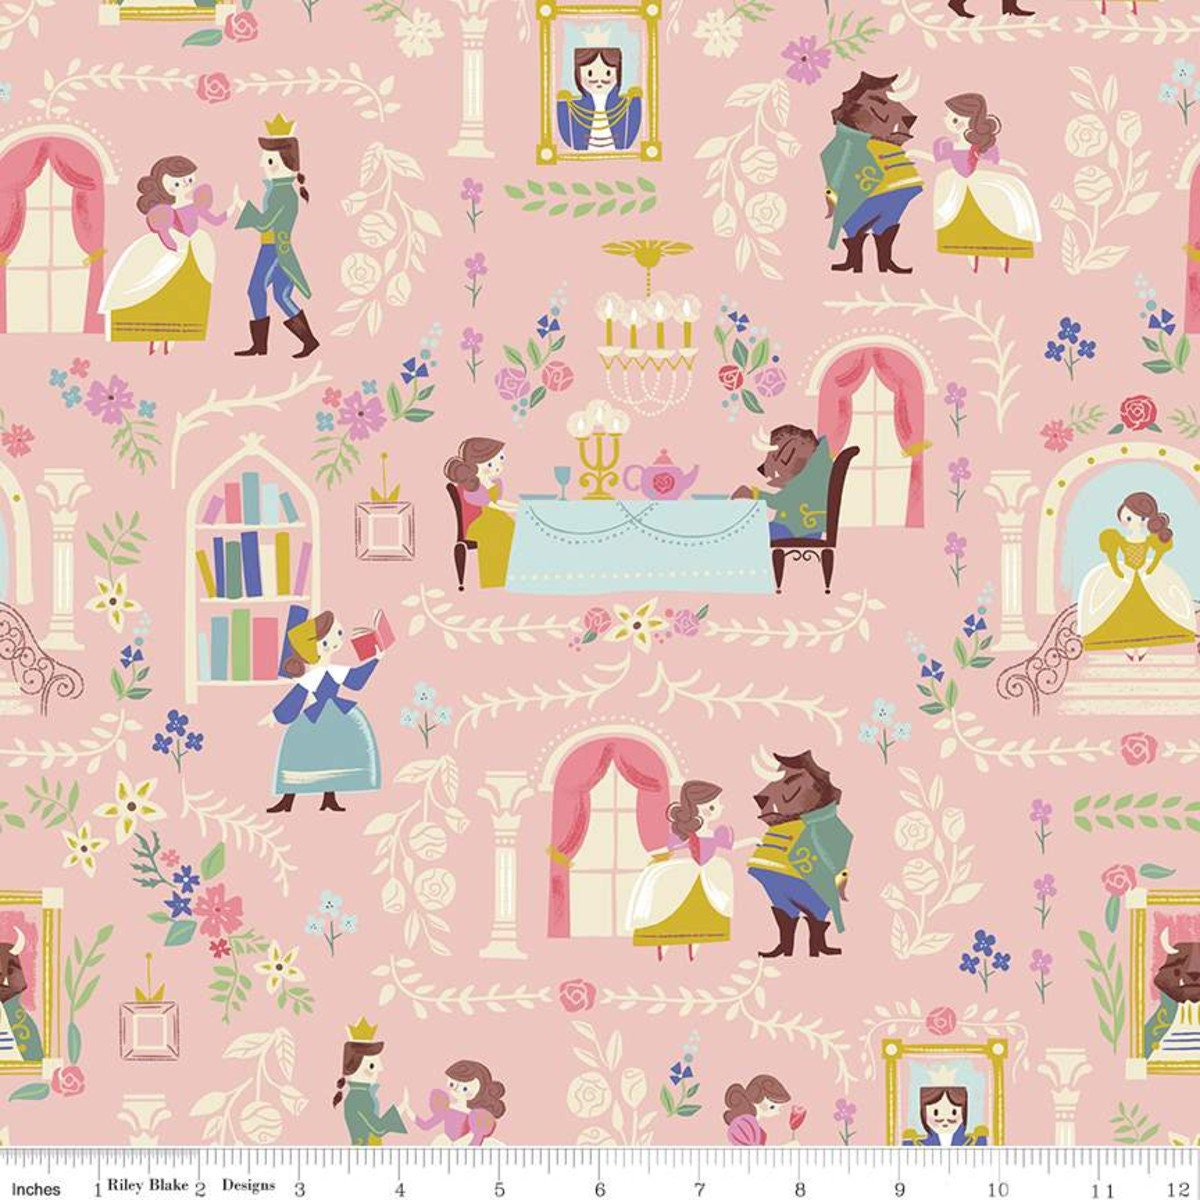 Beauty & The Beast by Jill Howarth Main Pink C9530-PINK Cotton Woven Fabric